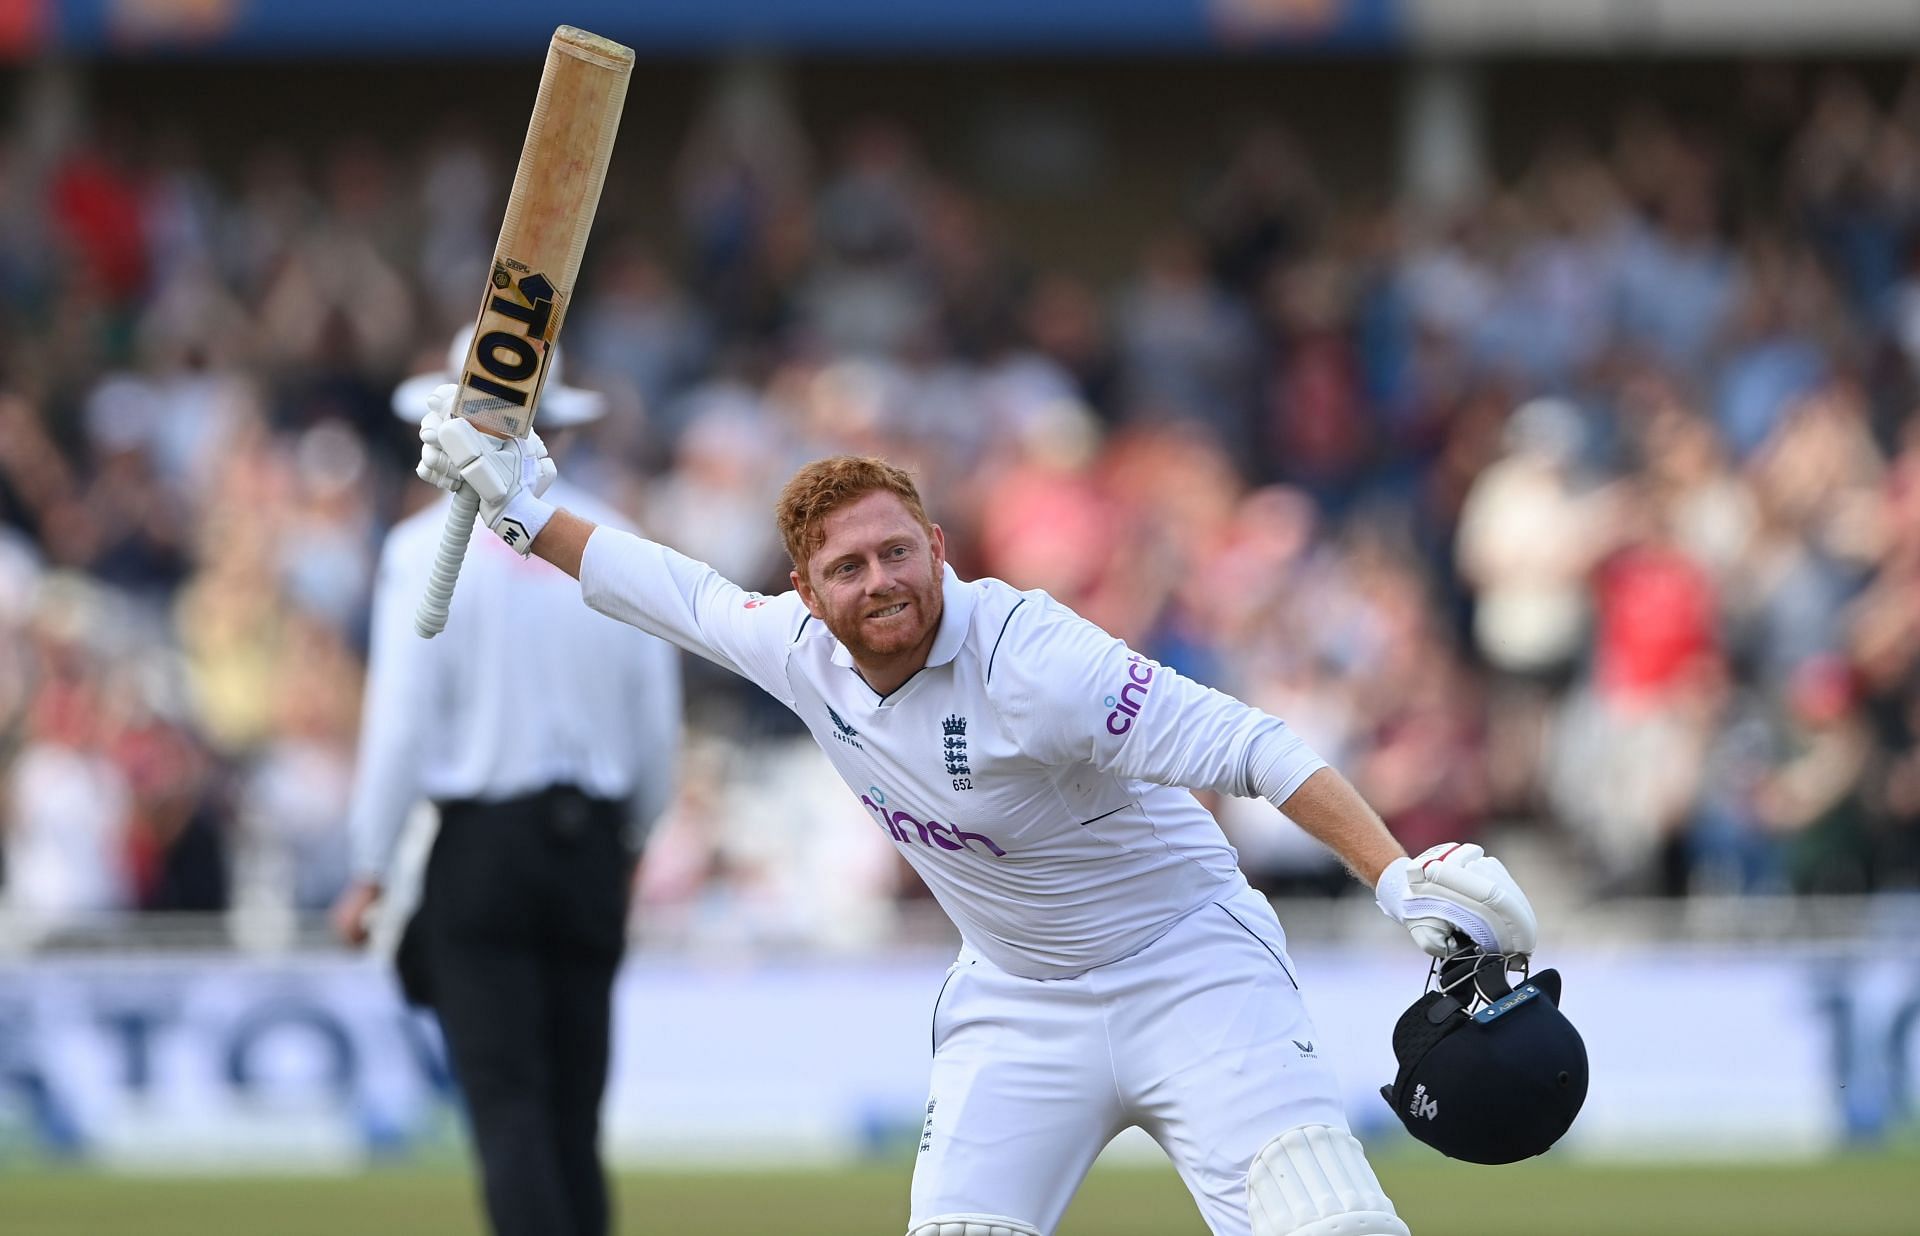 Jonny Bairstow can be the X-factor for England